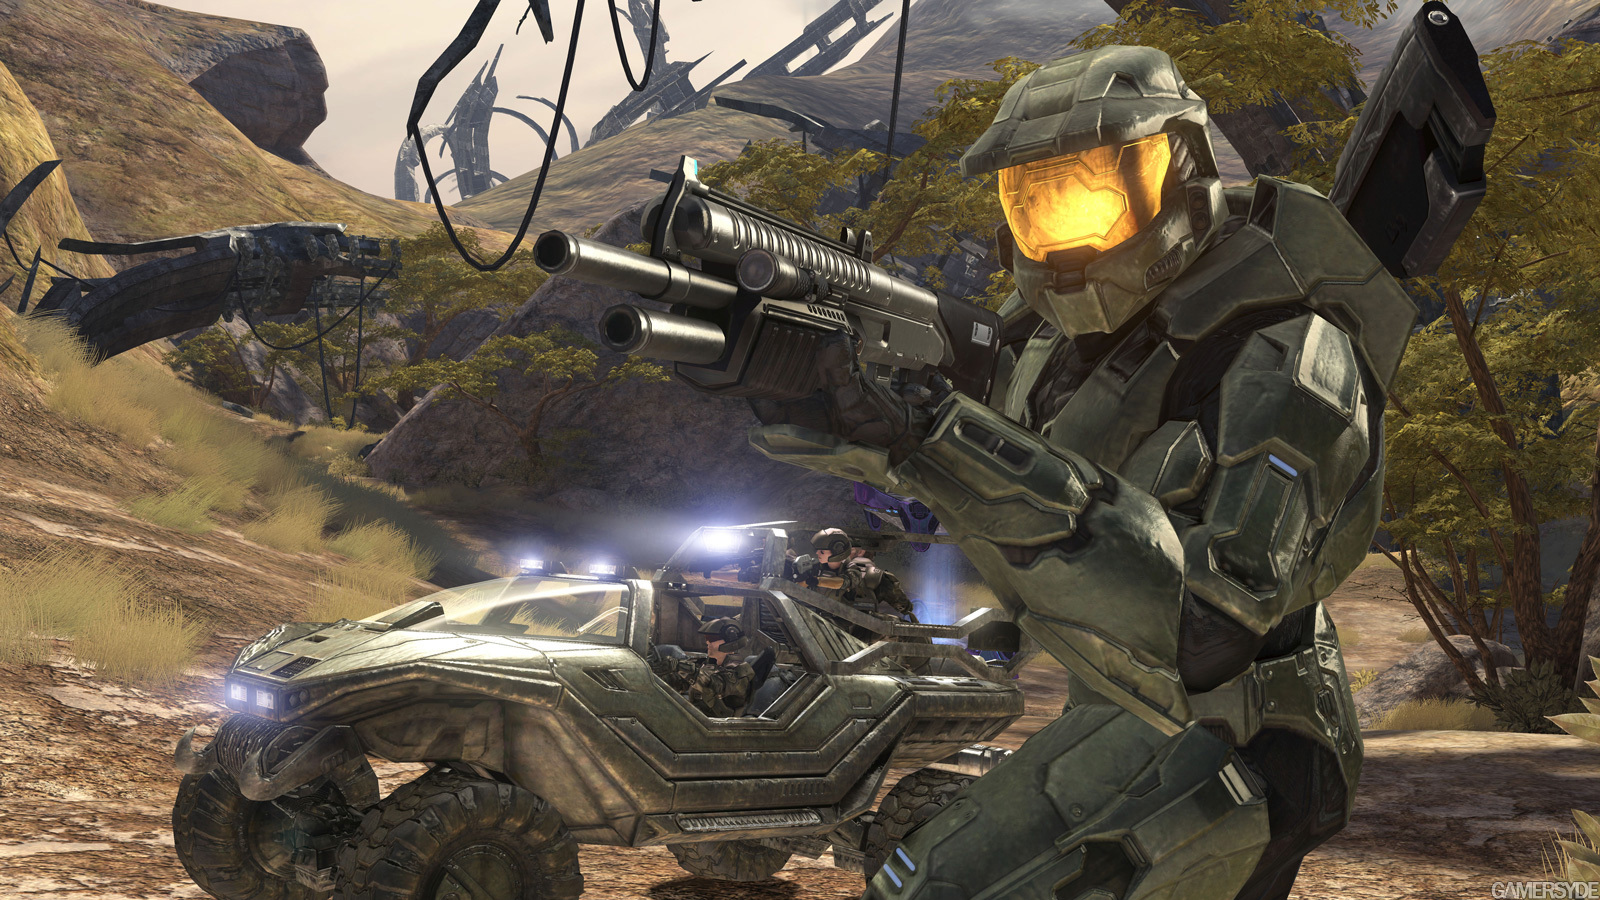 Campaign images of Halo 3 - Gamersyde